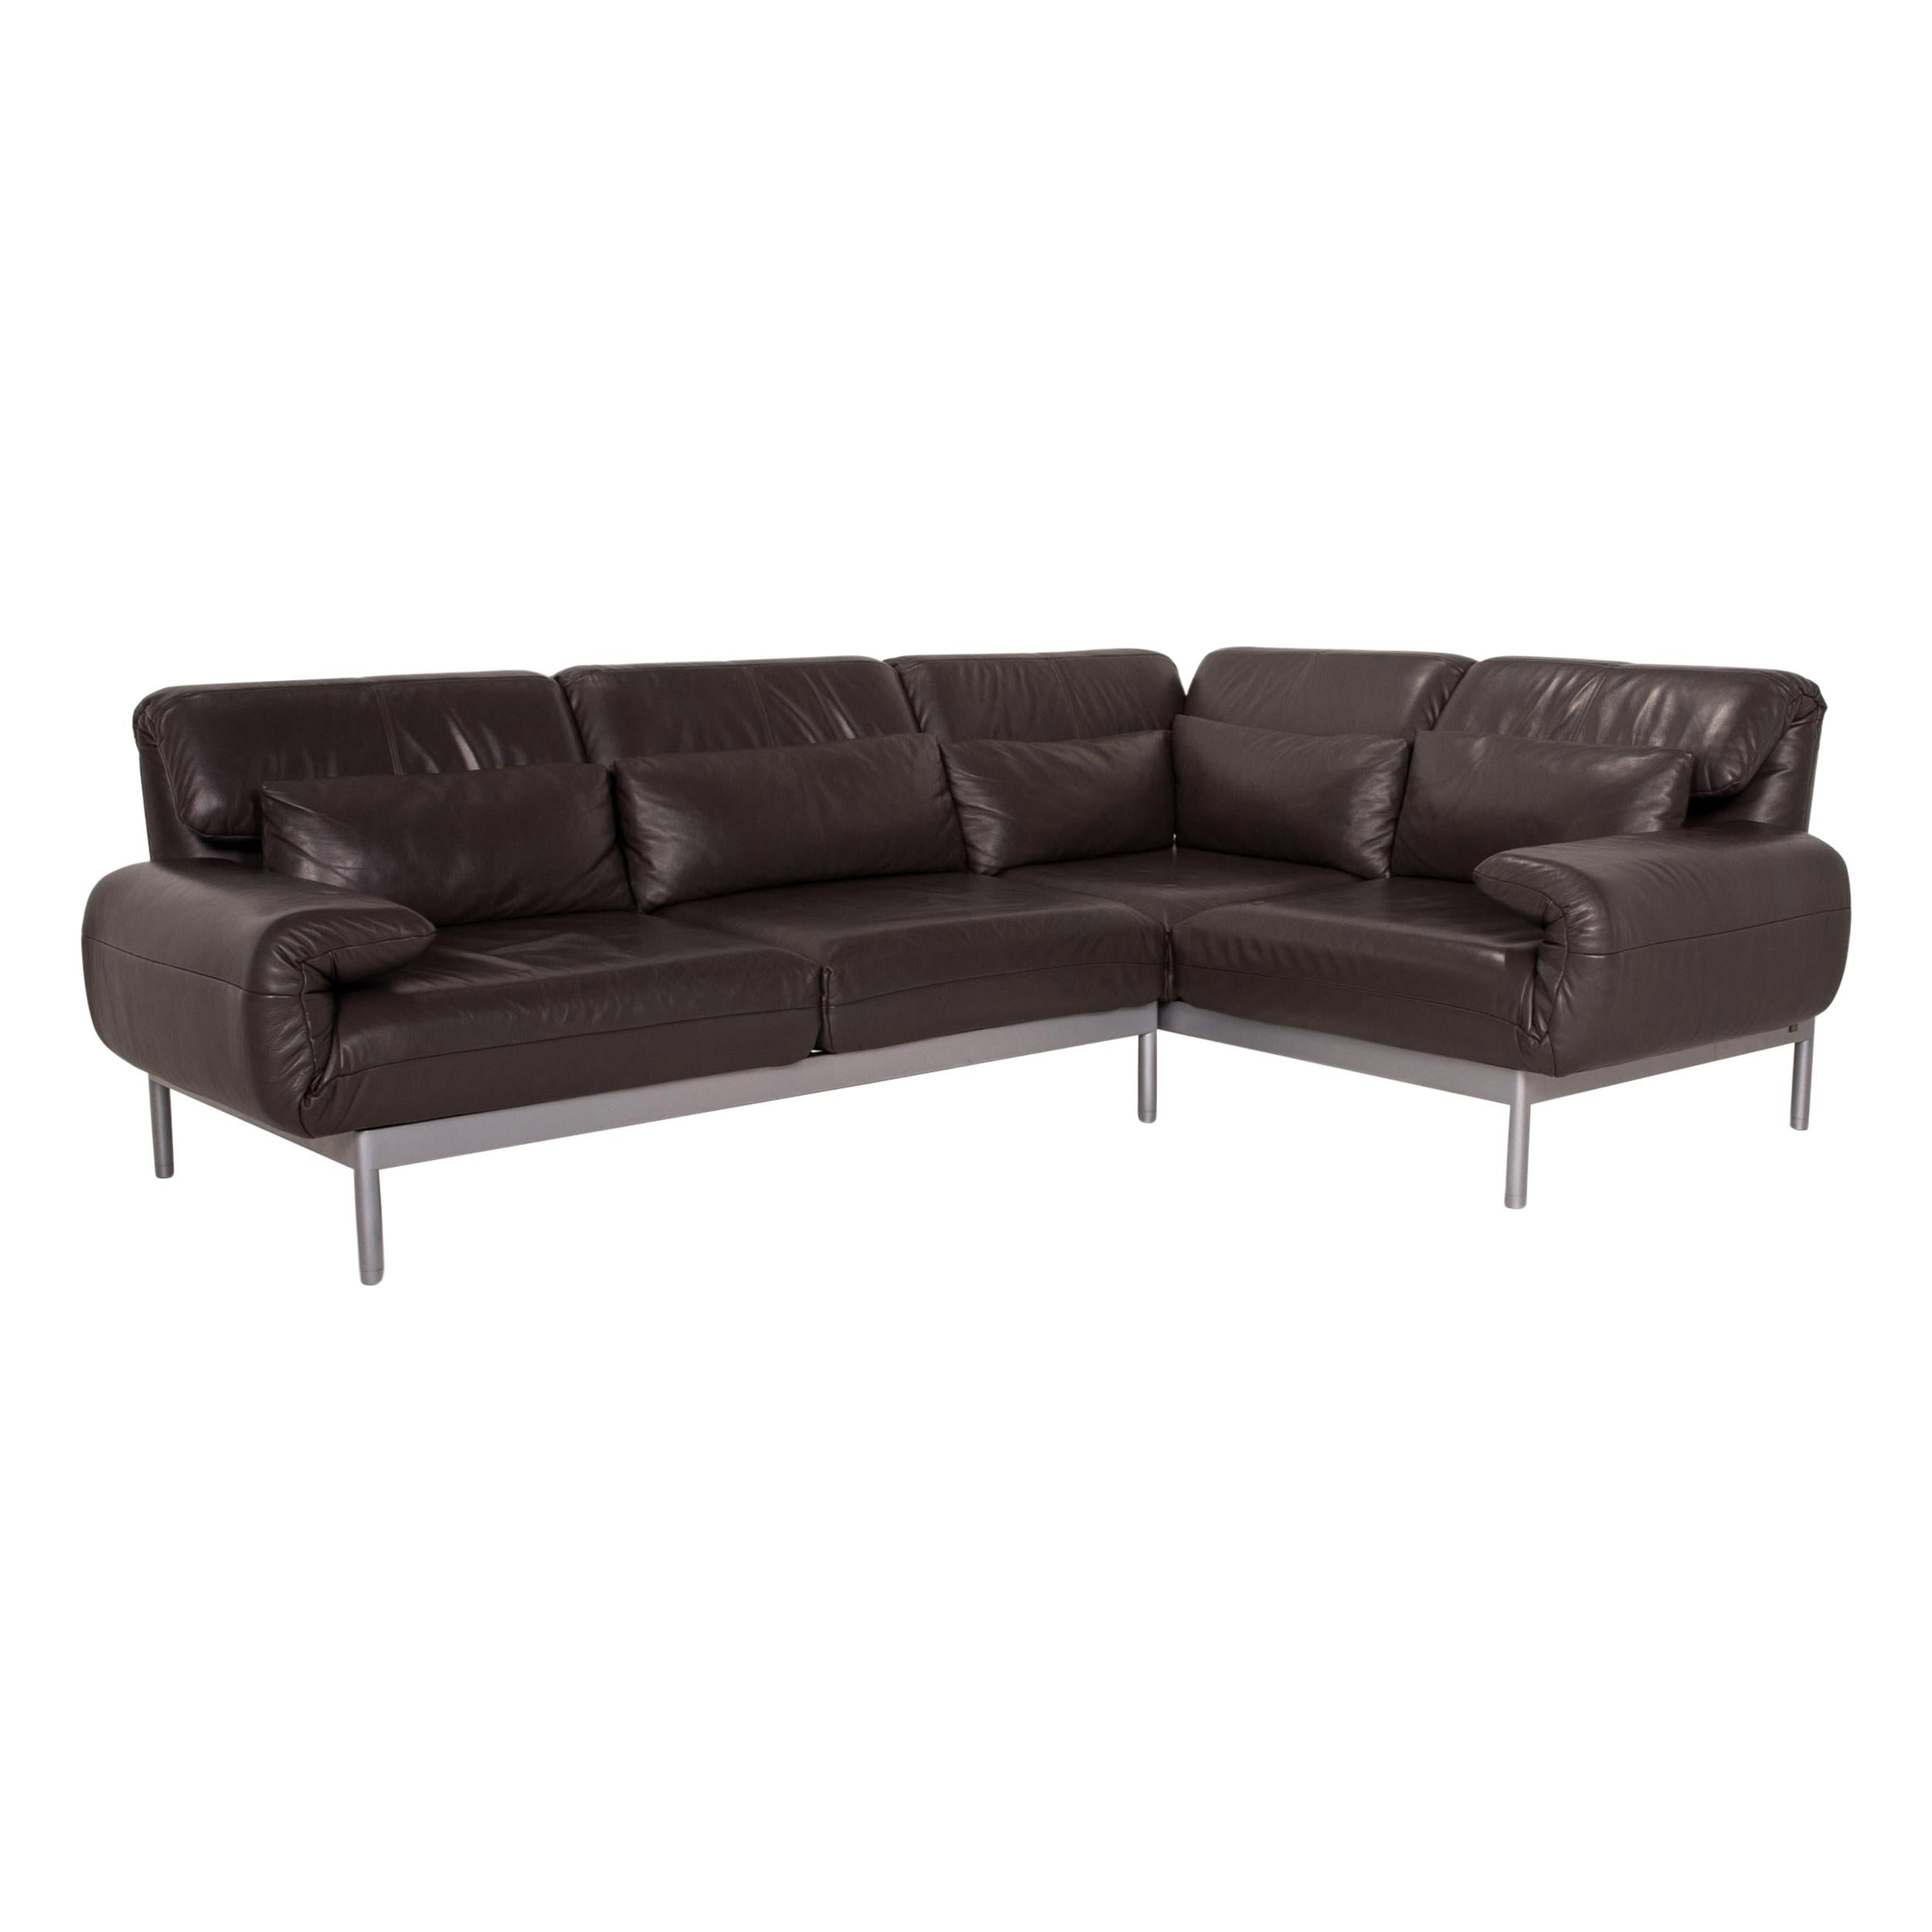 Rolf Benz Plura Leather Corner Sofa Brown Dark Brown Function Relax Function For Sale